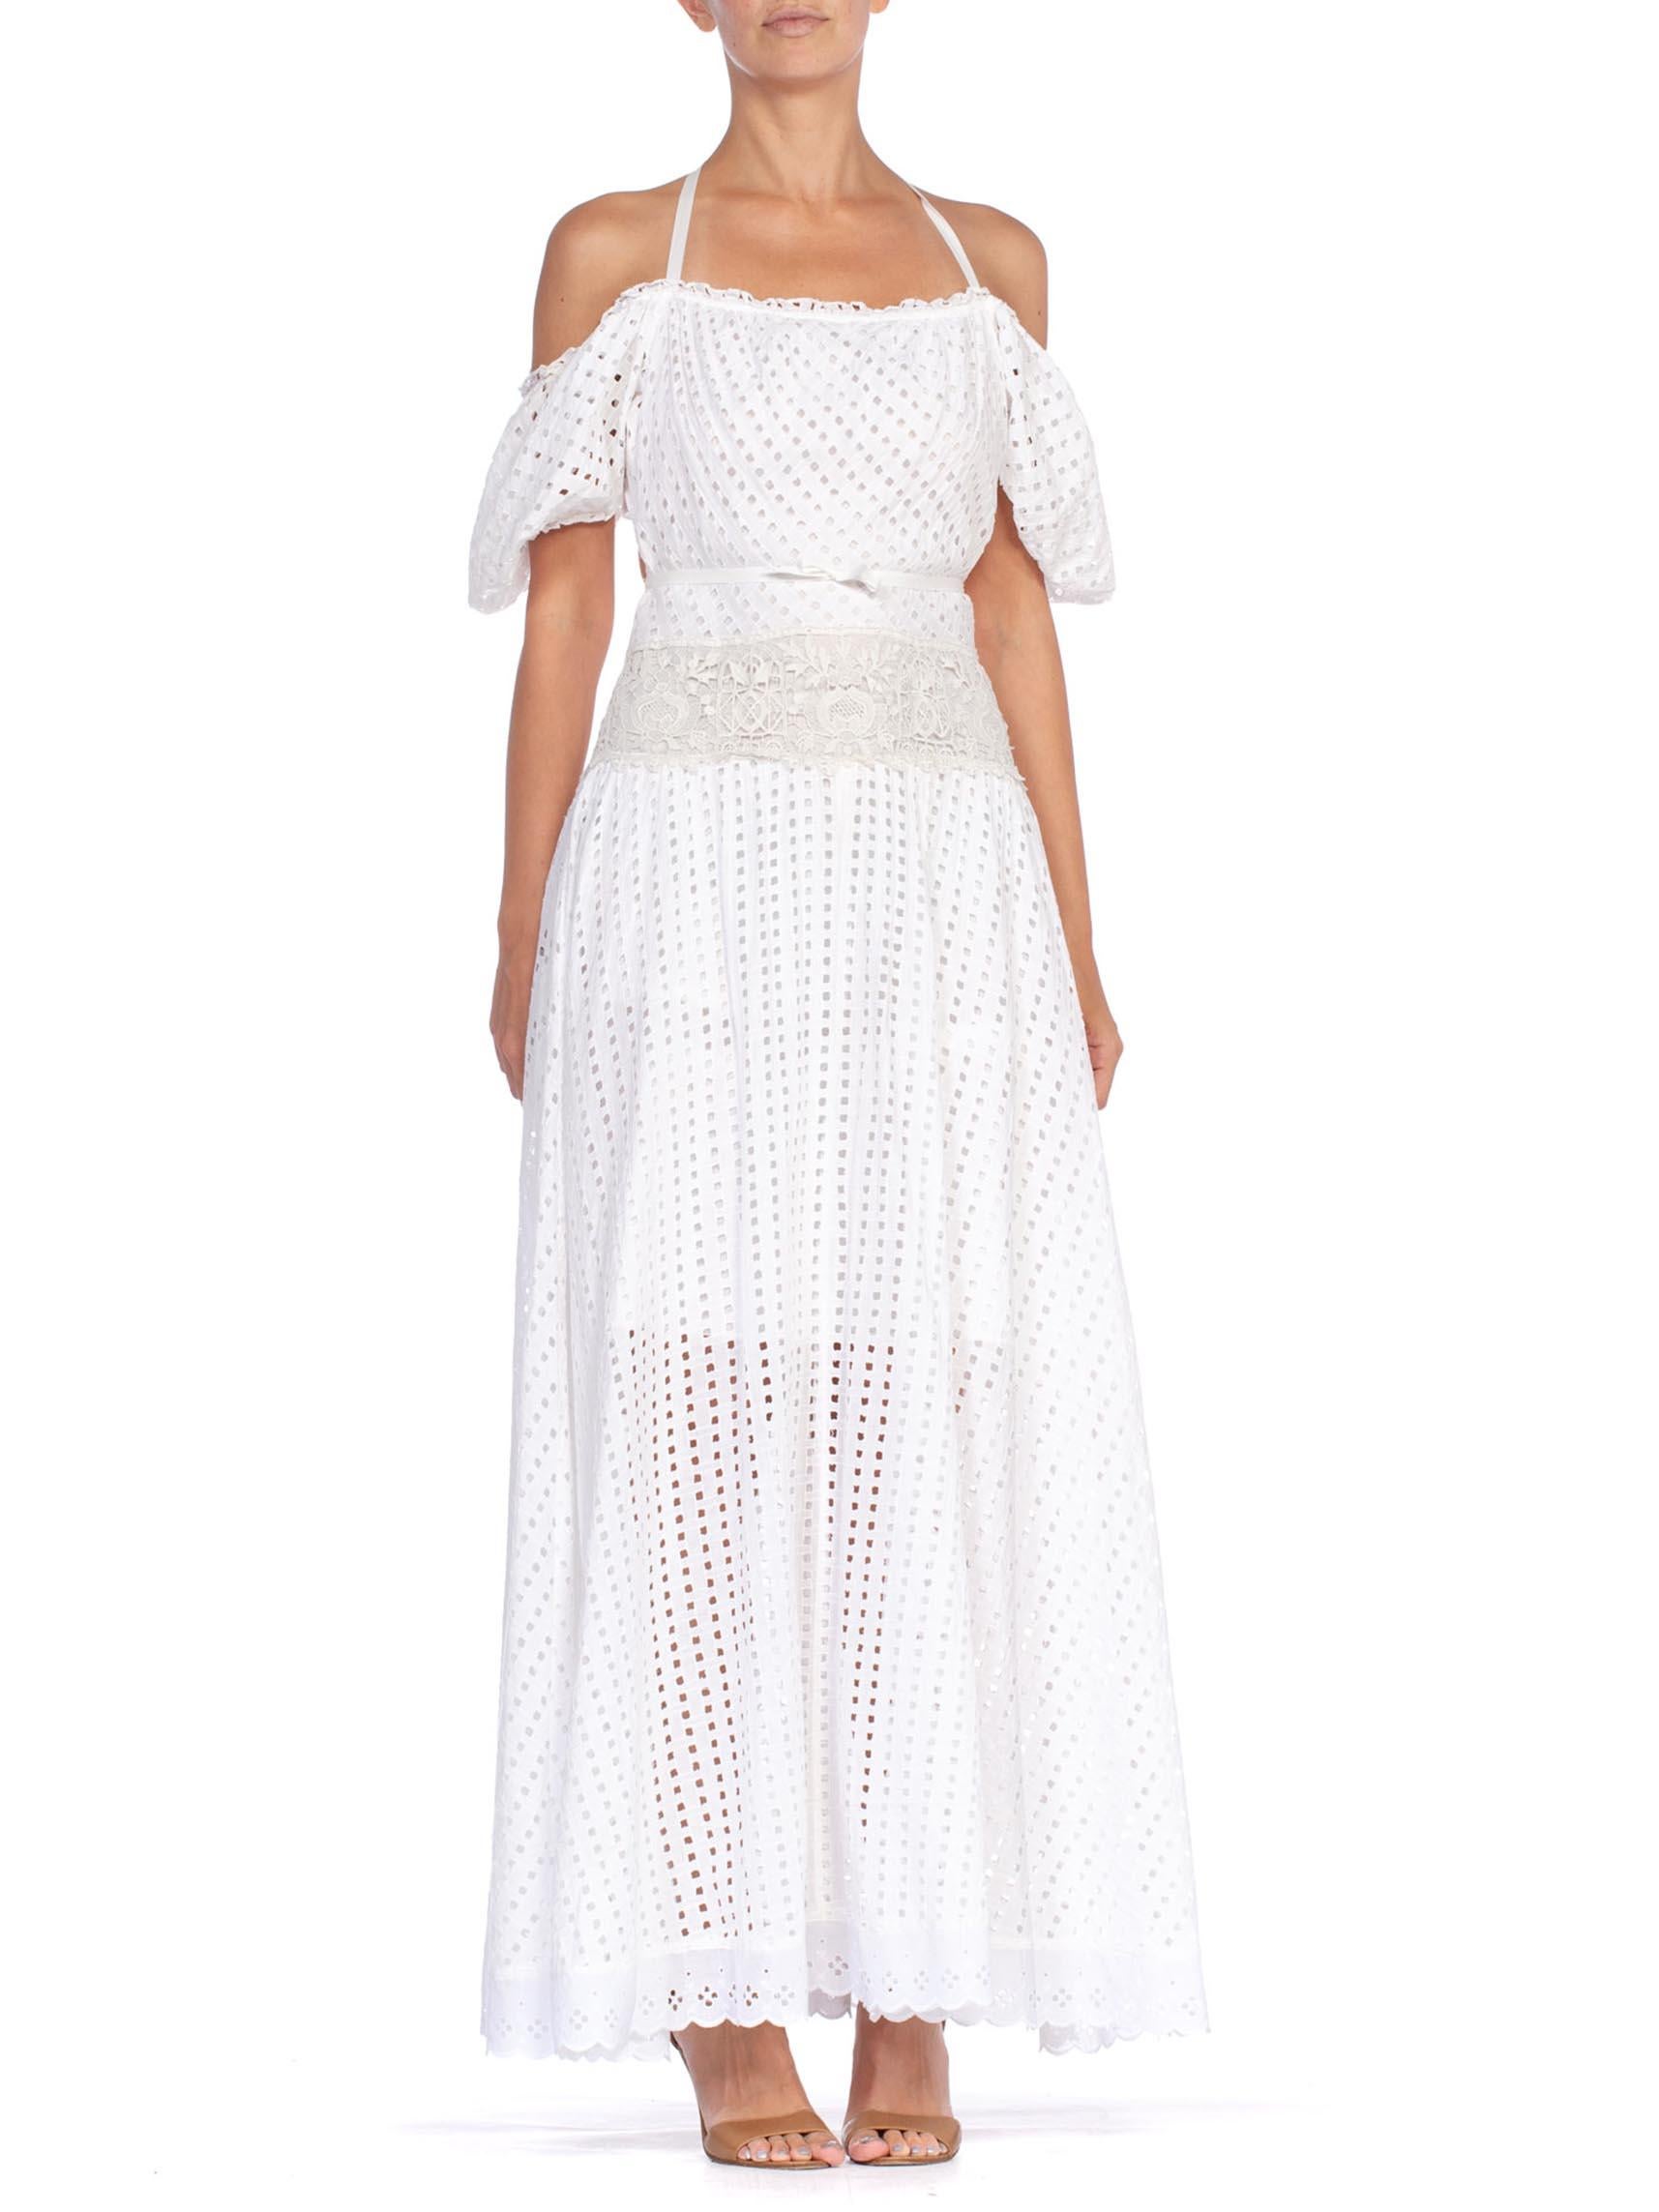 MORPHEW COLLECTION White Organic Cotton Backless Off Shoulder Maxi Dress Made From Victorian & 1930'S Lace
MORPHEW COLLECTION is made entirely by hand in our NYC Ateliér of rare antique materials sourced from around the globe. Our sustainable